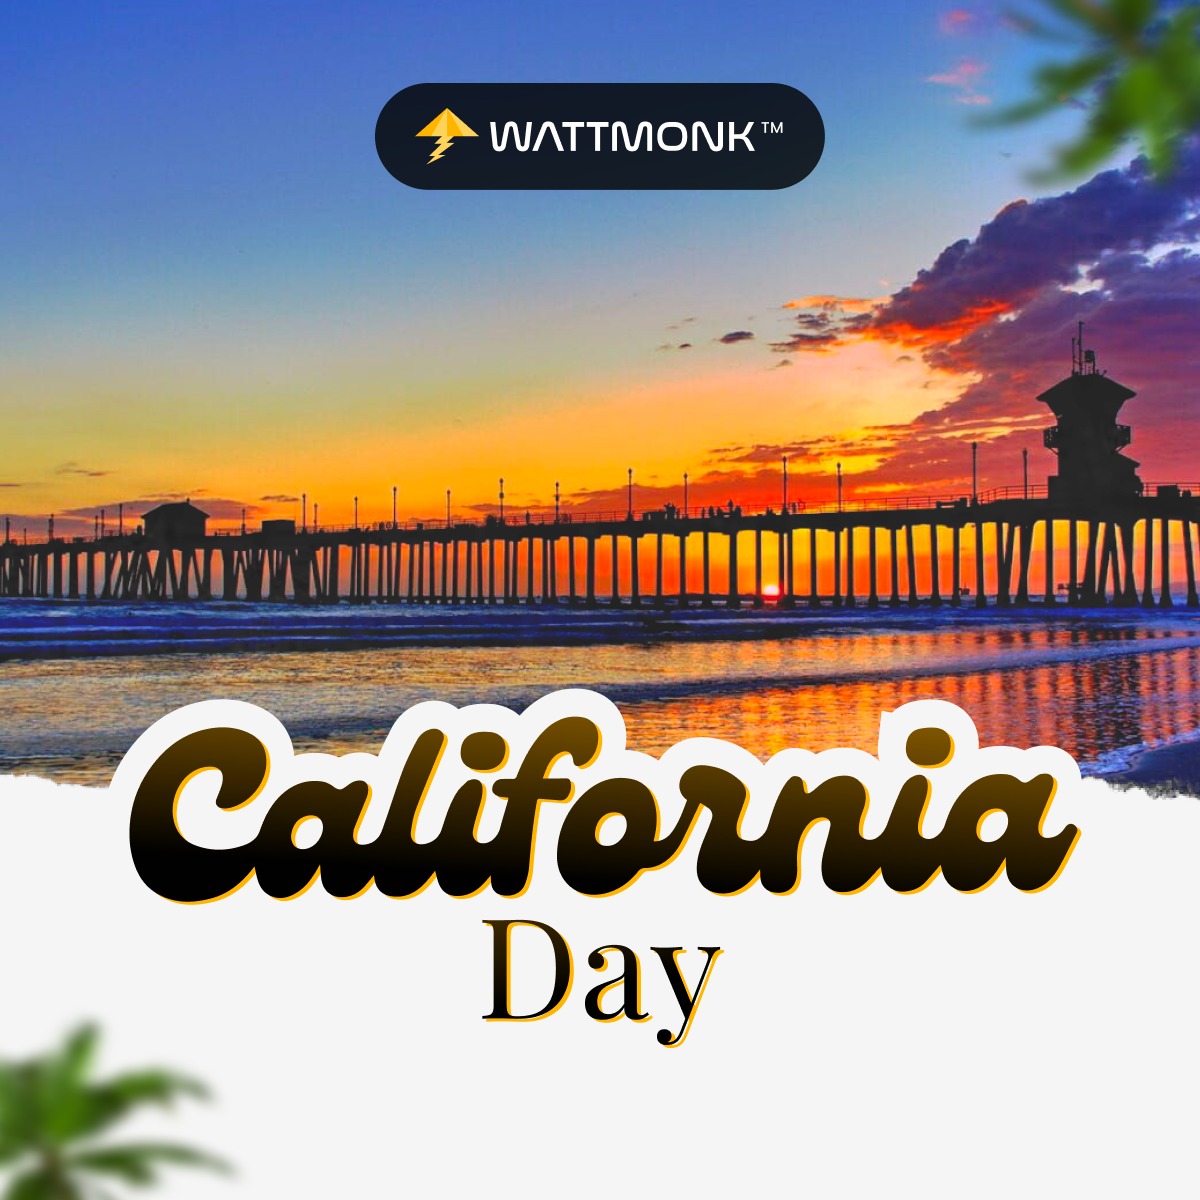 🌞 Happy National California Day! 🌴 Let's celebrate the Golden State's breathtaking beauty, iconic landmarks, and vibrant culture. From stunning coastlines to majestic mountains, California has it all! 🏖️🏞️ 
#CaliforniaDay #GoldenState #WestCoastVibes